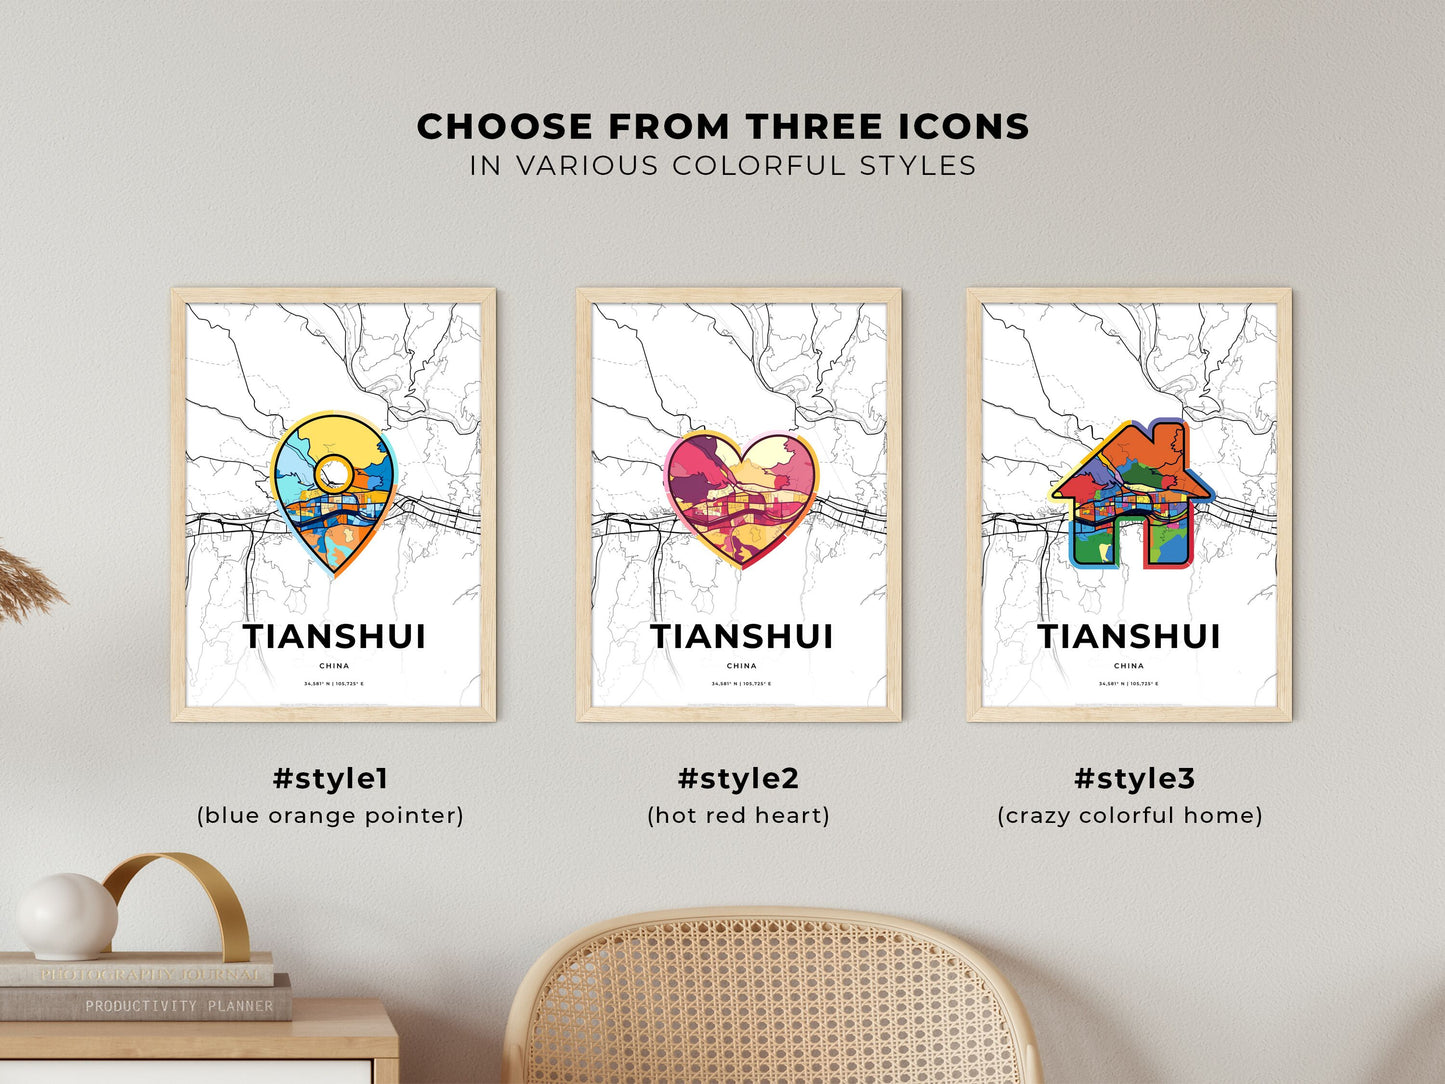 TIANSHUI CHINA minimal art map with a colorful icon. Where it all began, Couple map gift.